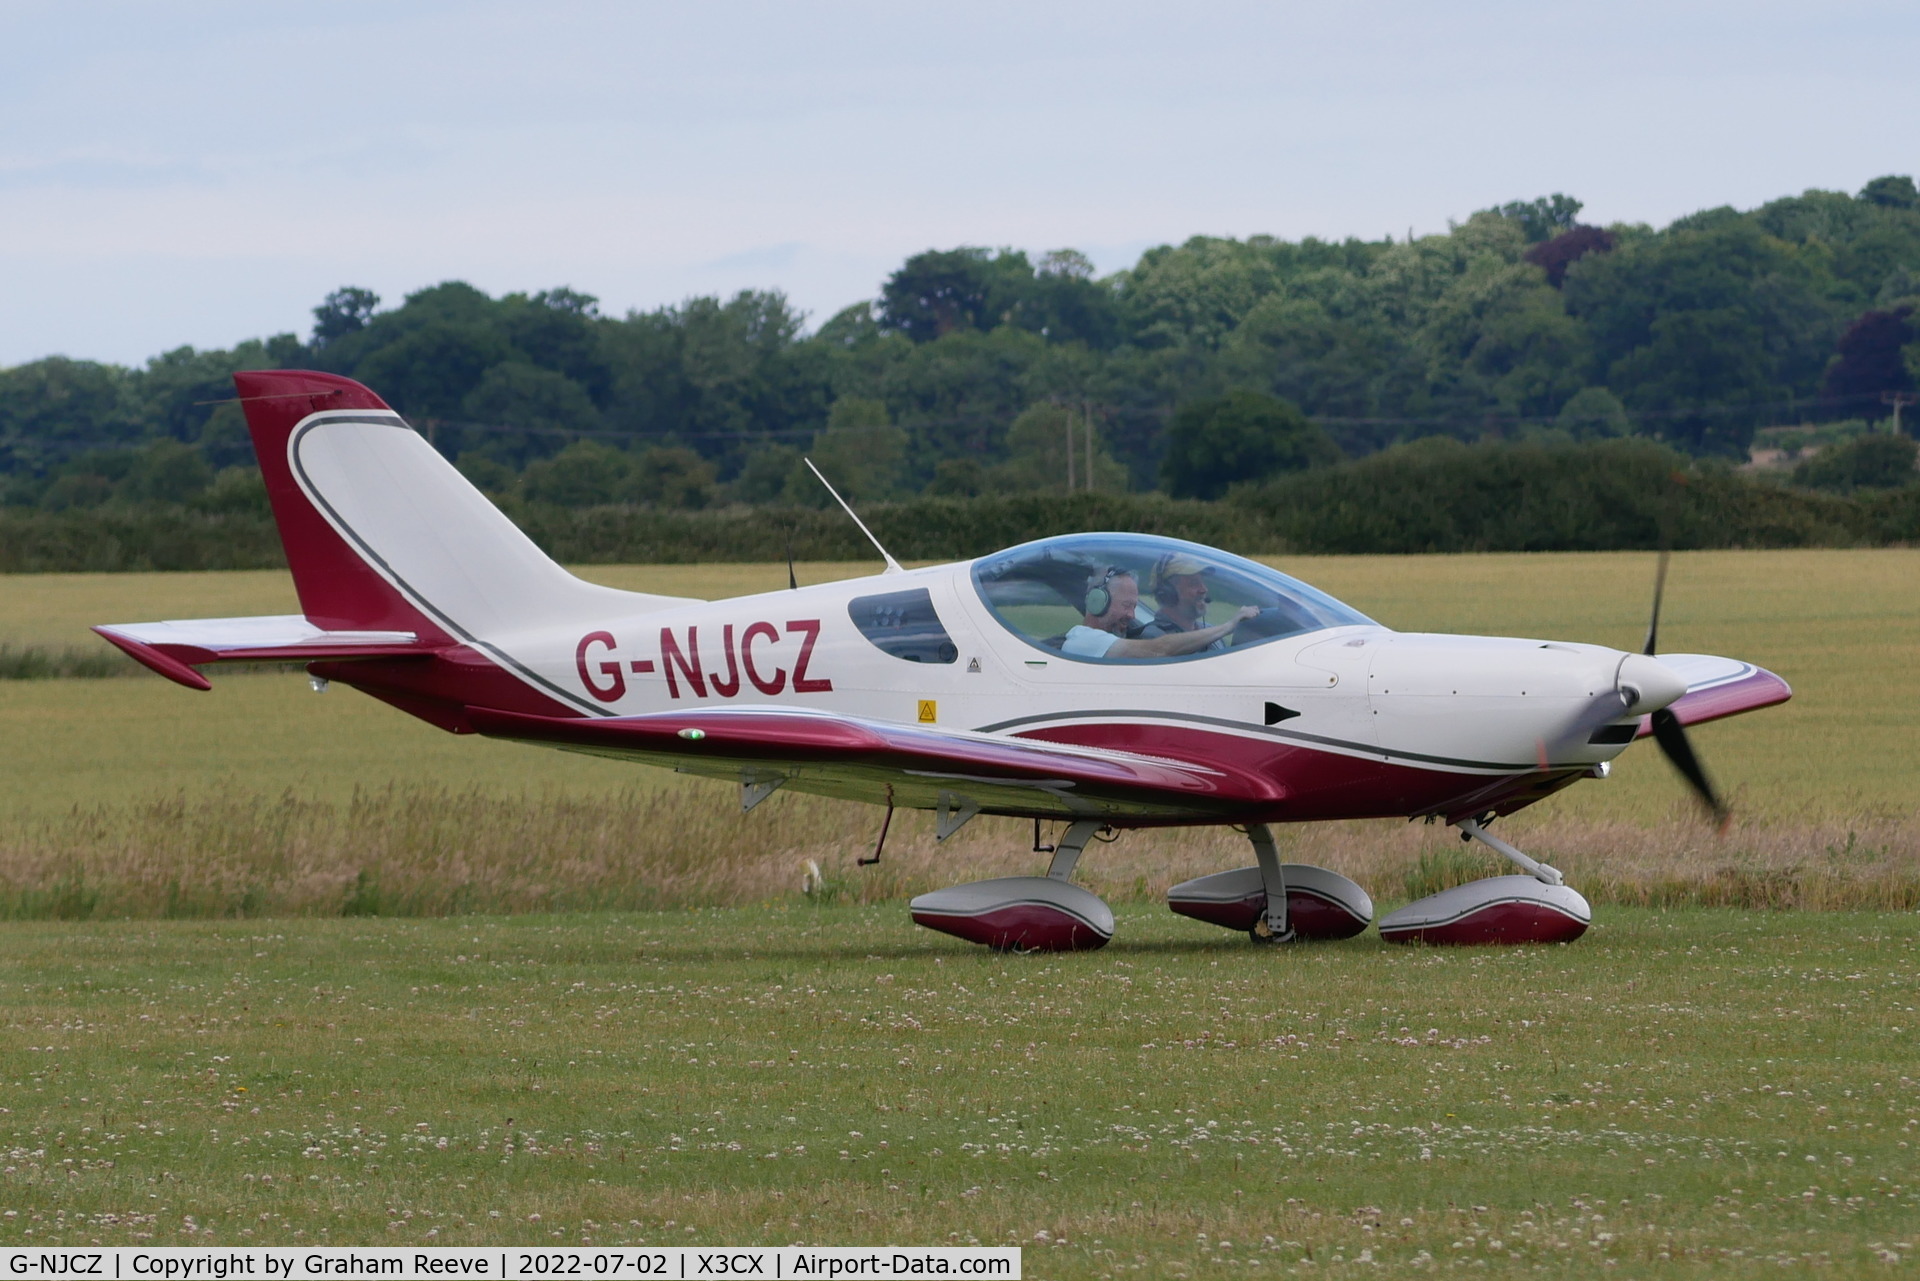 G-NJCZ, 2010 SportCruiser (PiperSport) Piper Sport C/N P1001087, Just landed at Northrepps.